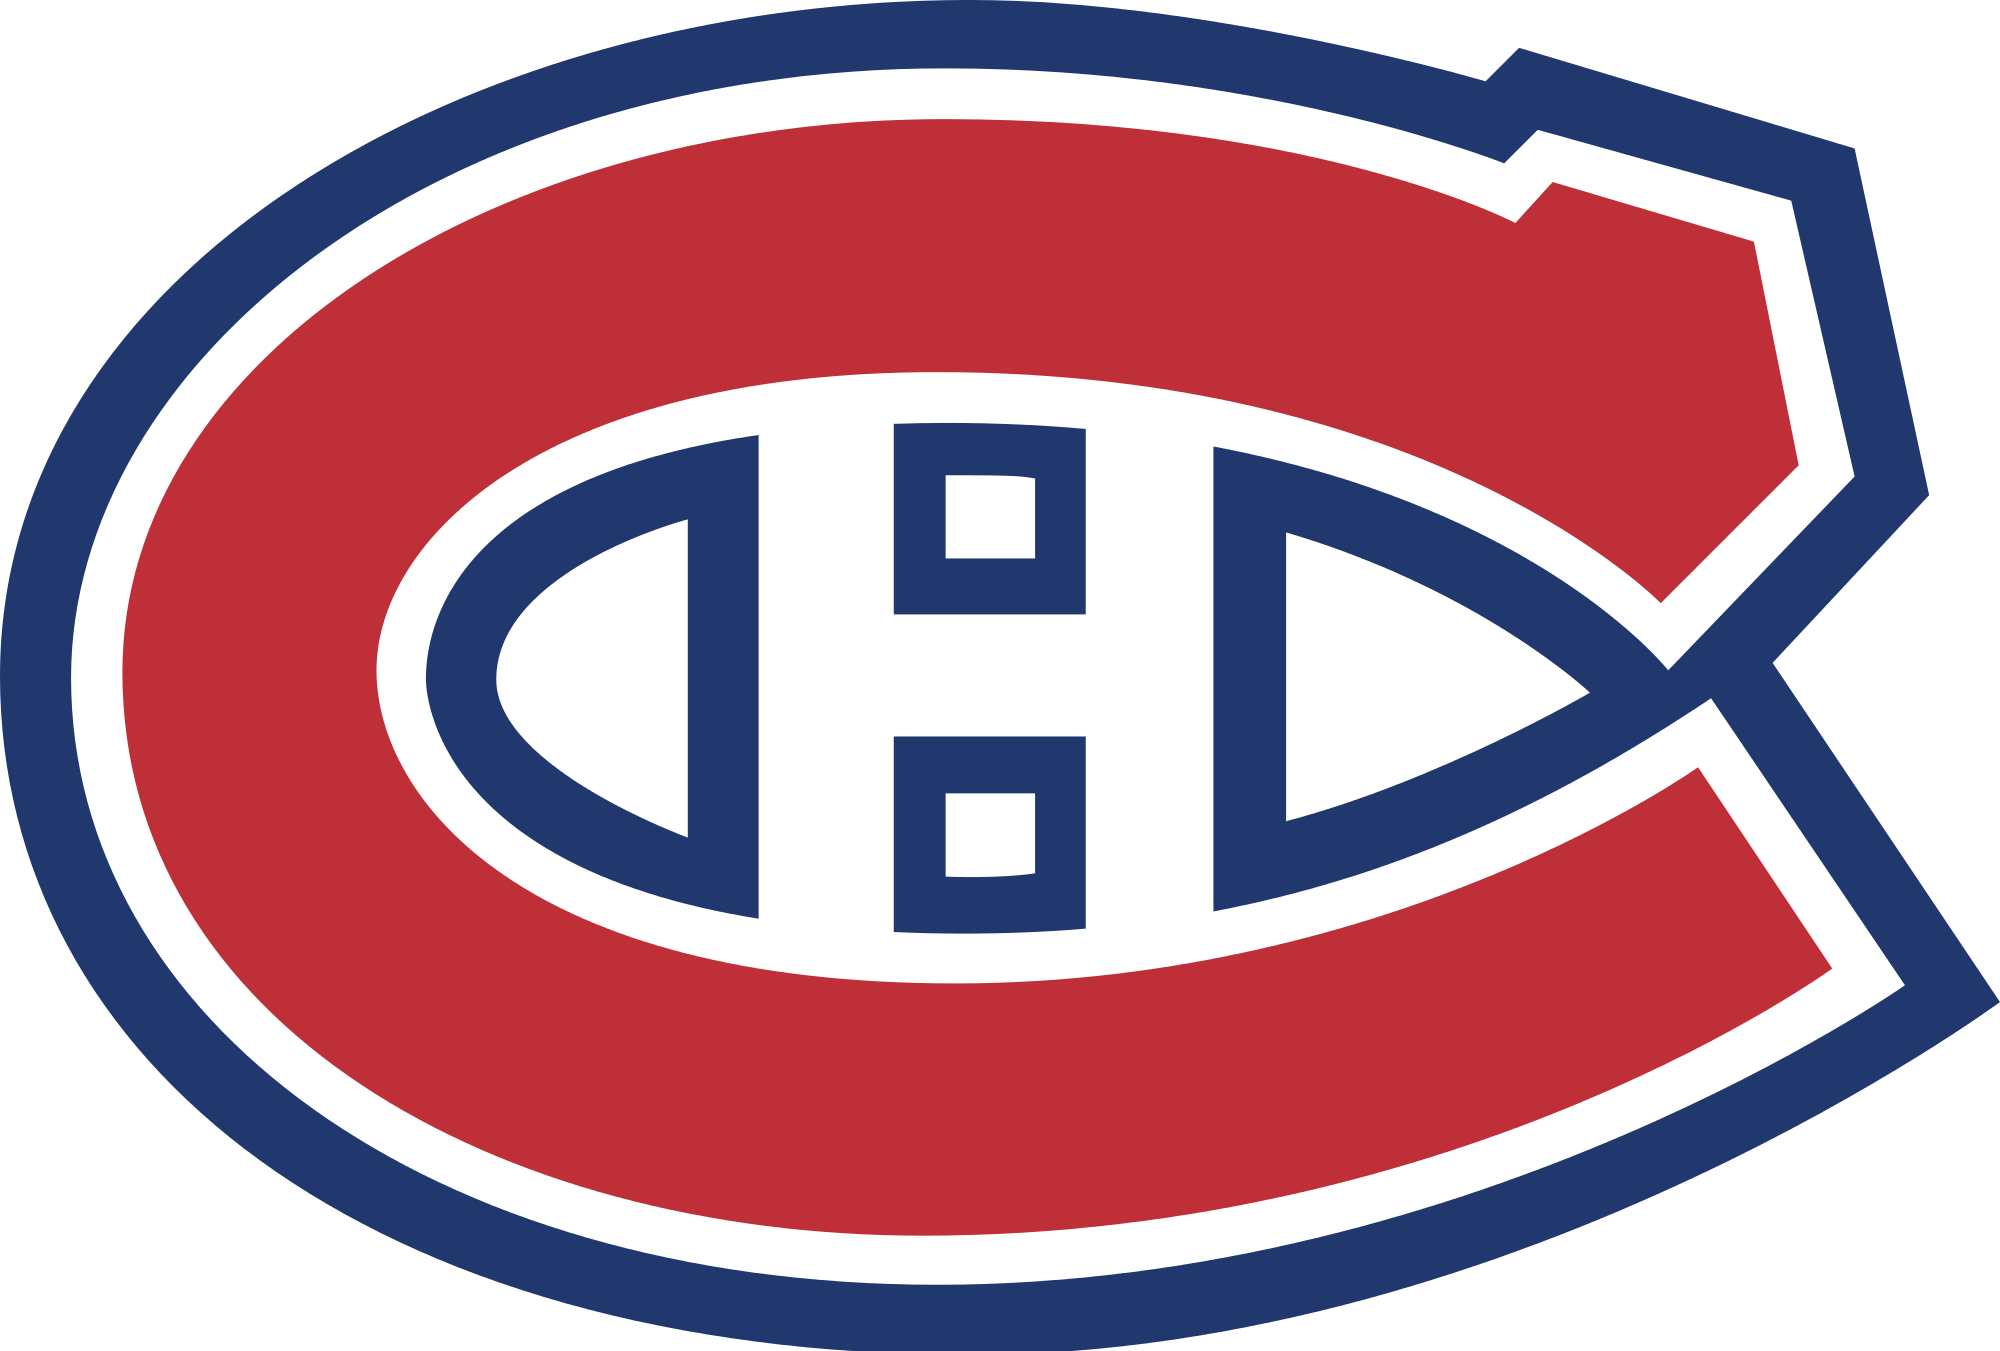 https://thesportsdaily.com/wp-content/uploads/sites/95/2016/10/canadiens.png?w=100&h=600&crop=1&h=60